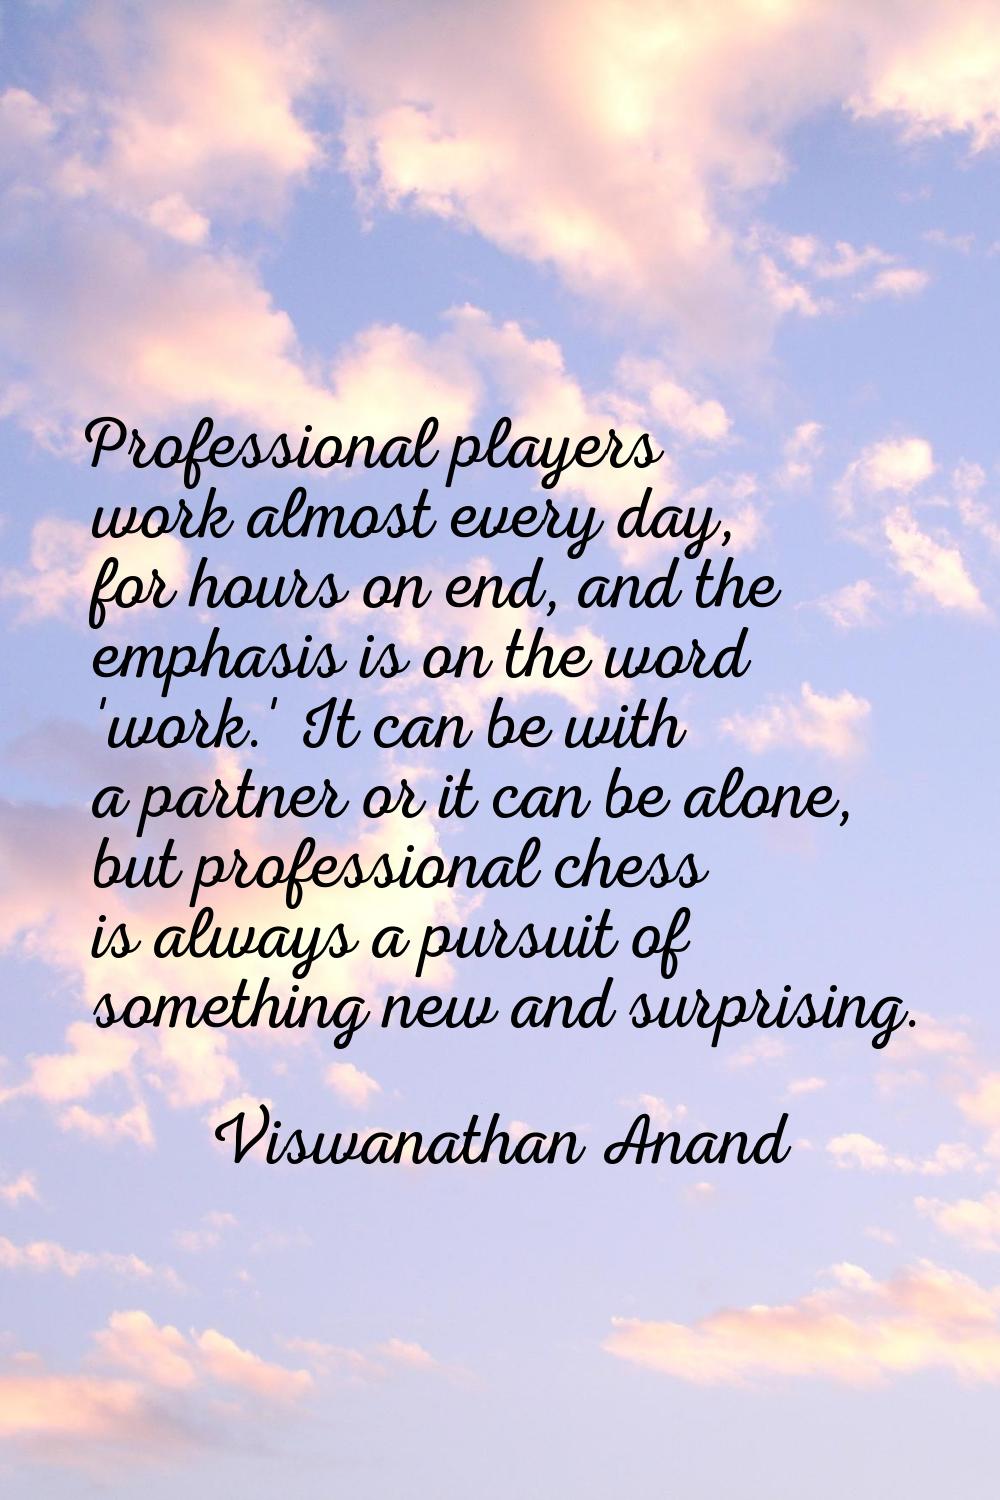 Professional players work almost every day, for hours on end, and the emphasis is on the word 'work